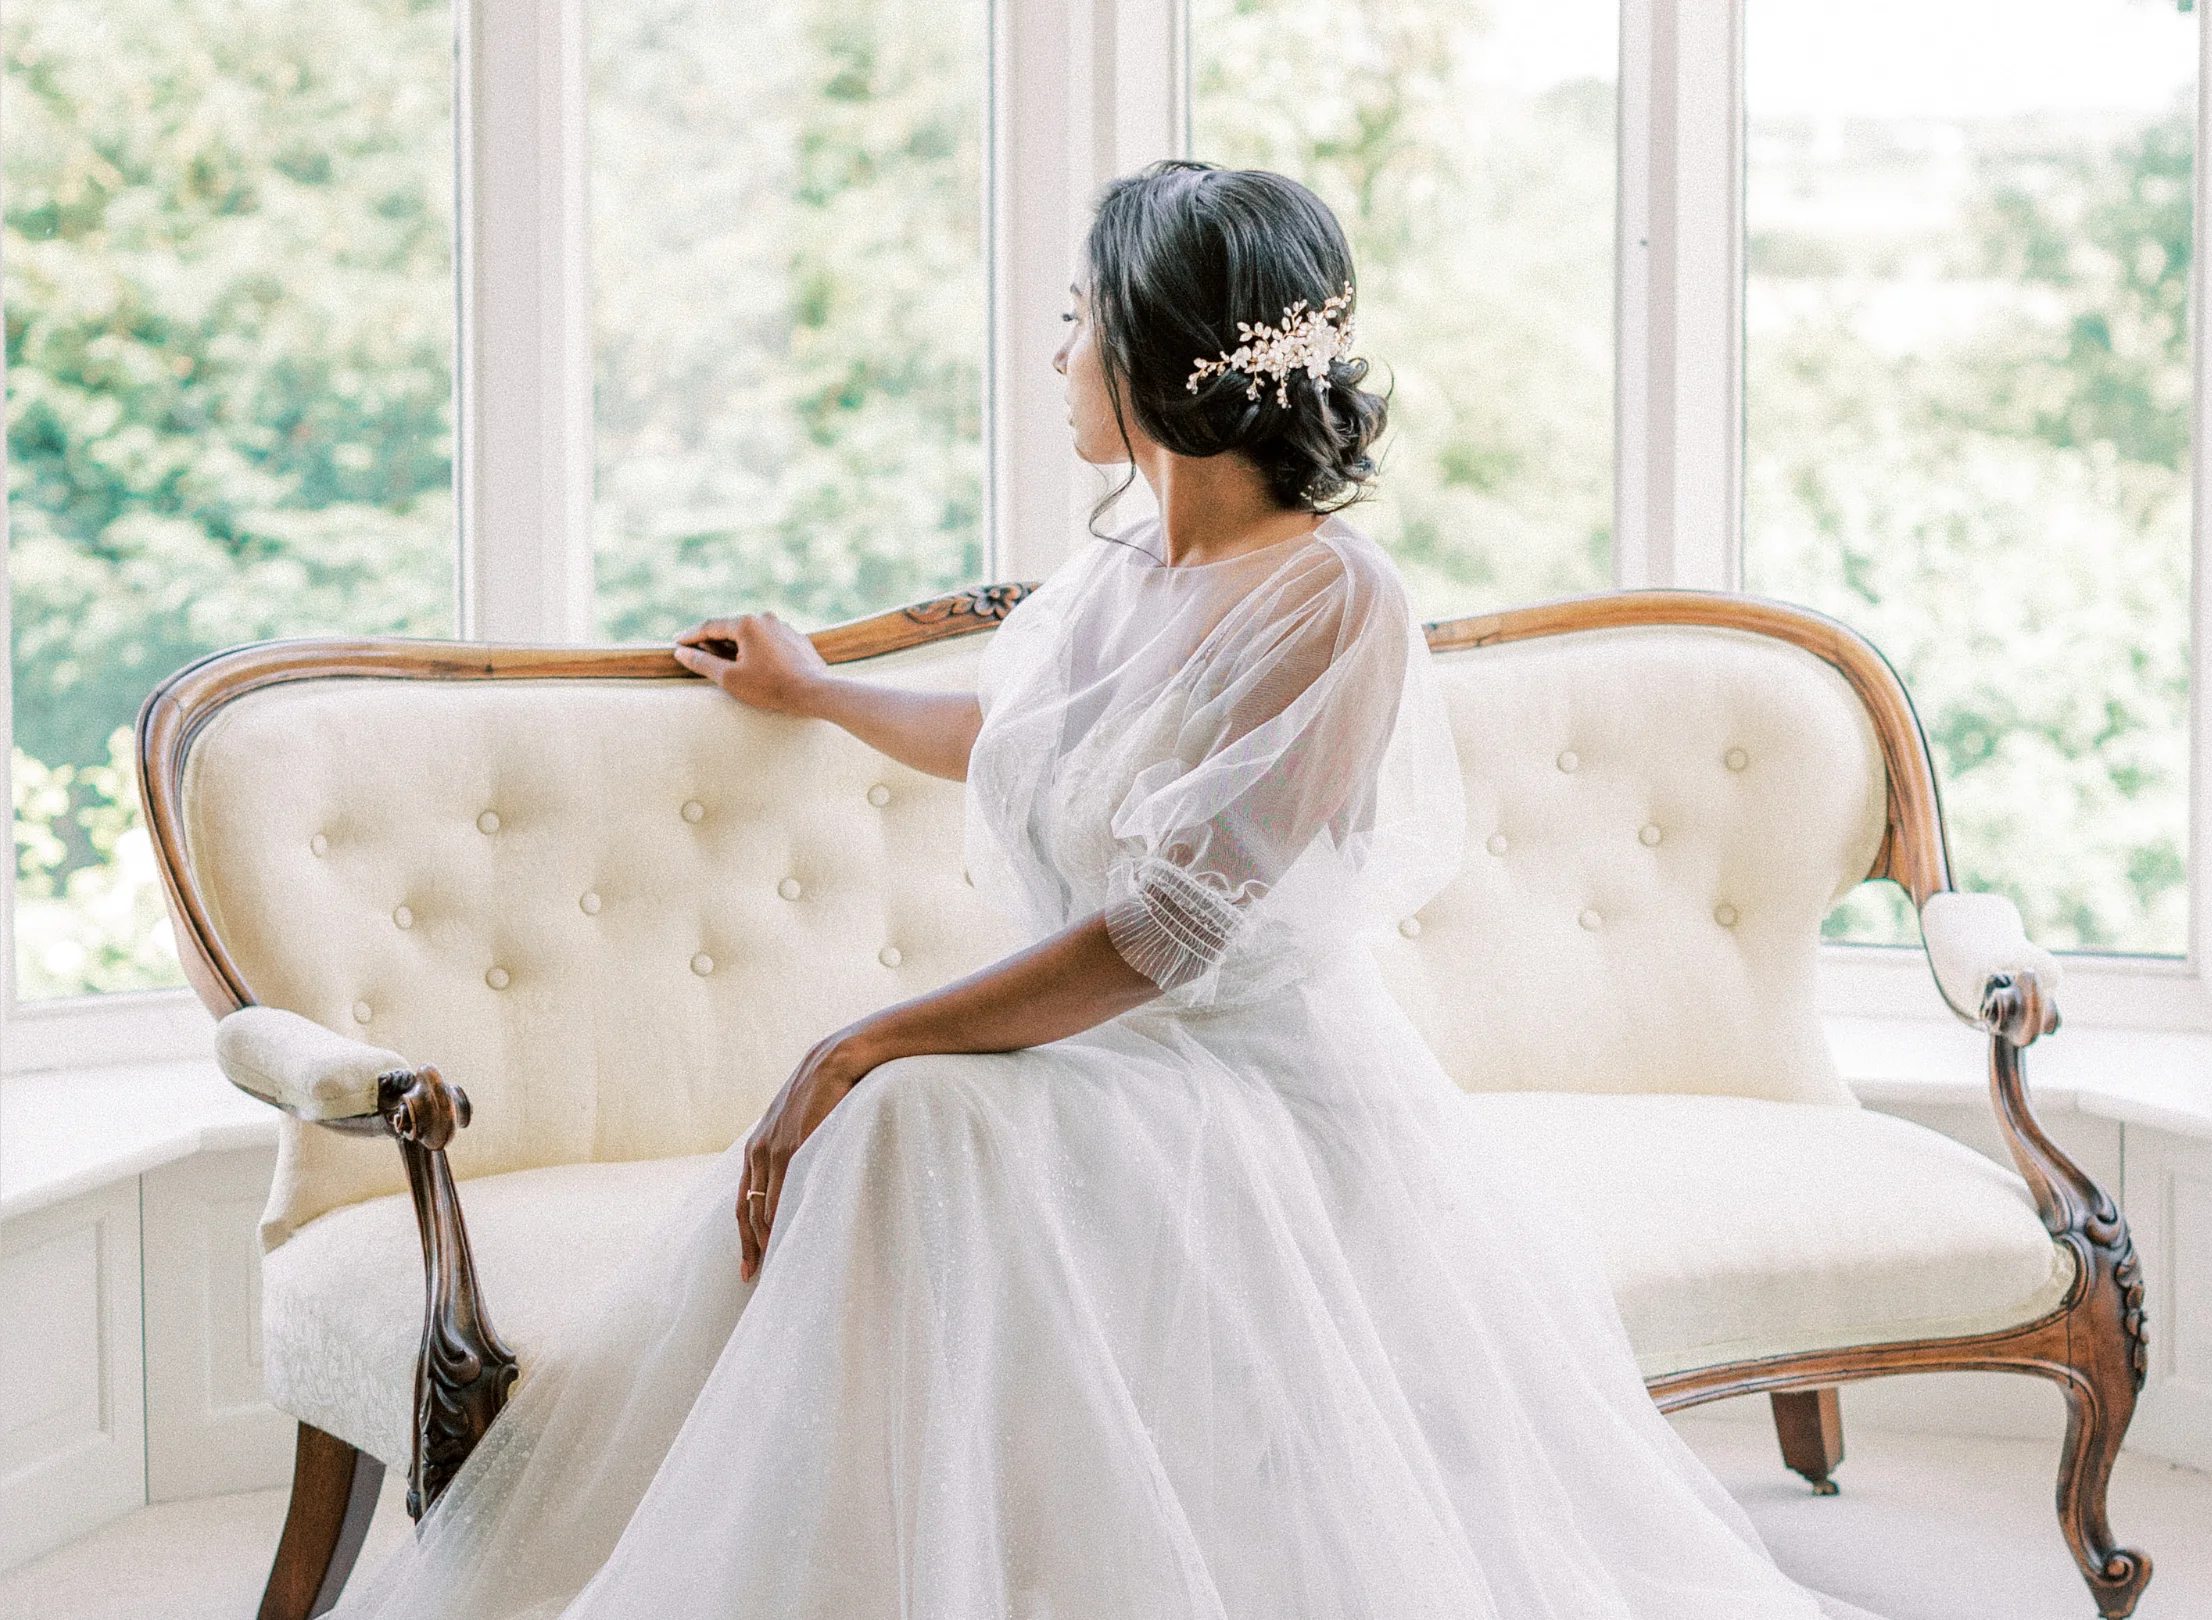 Chaise longue in window with bride sitting on it looking out of the window